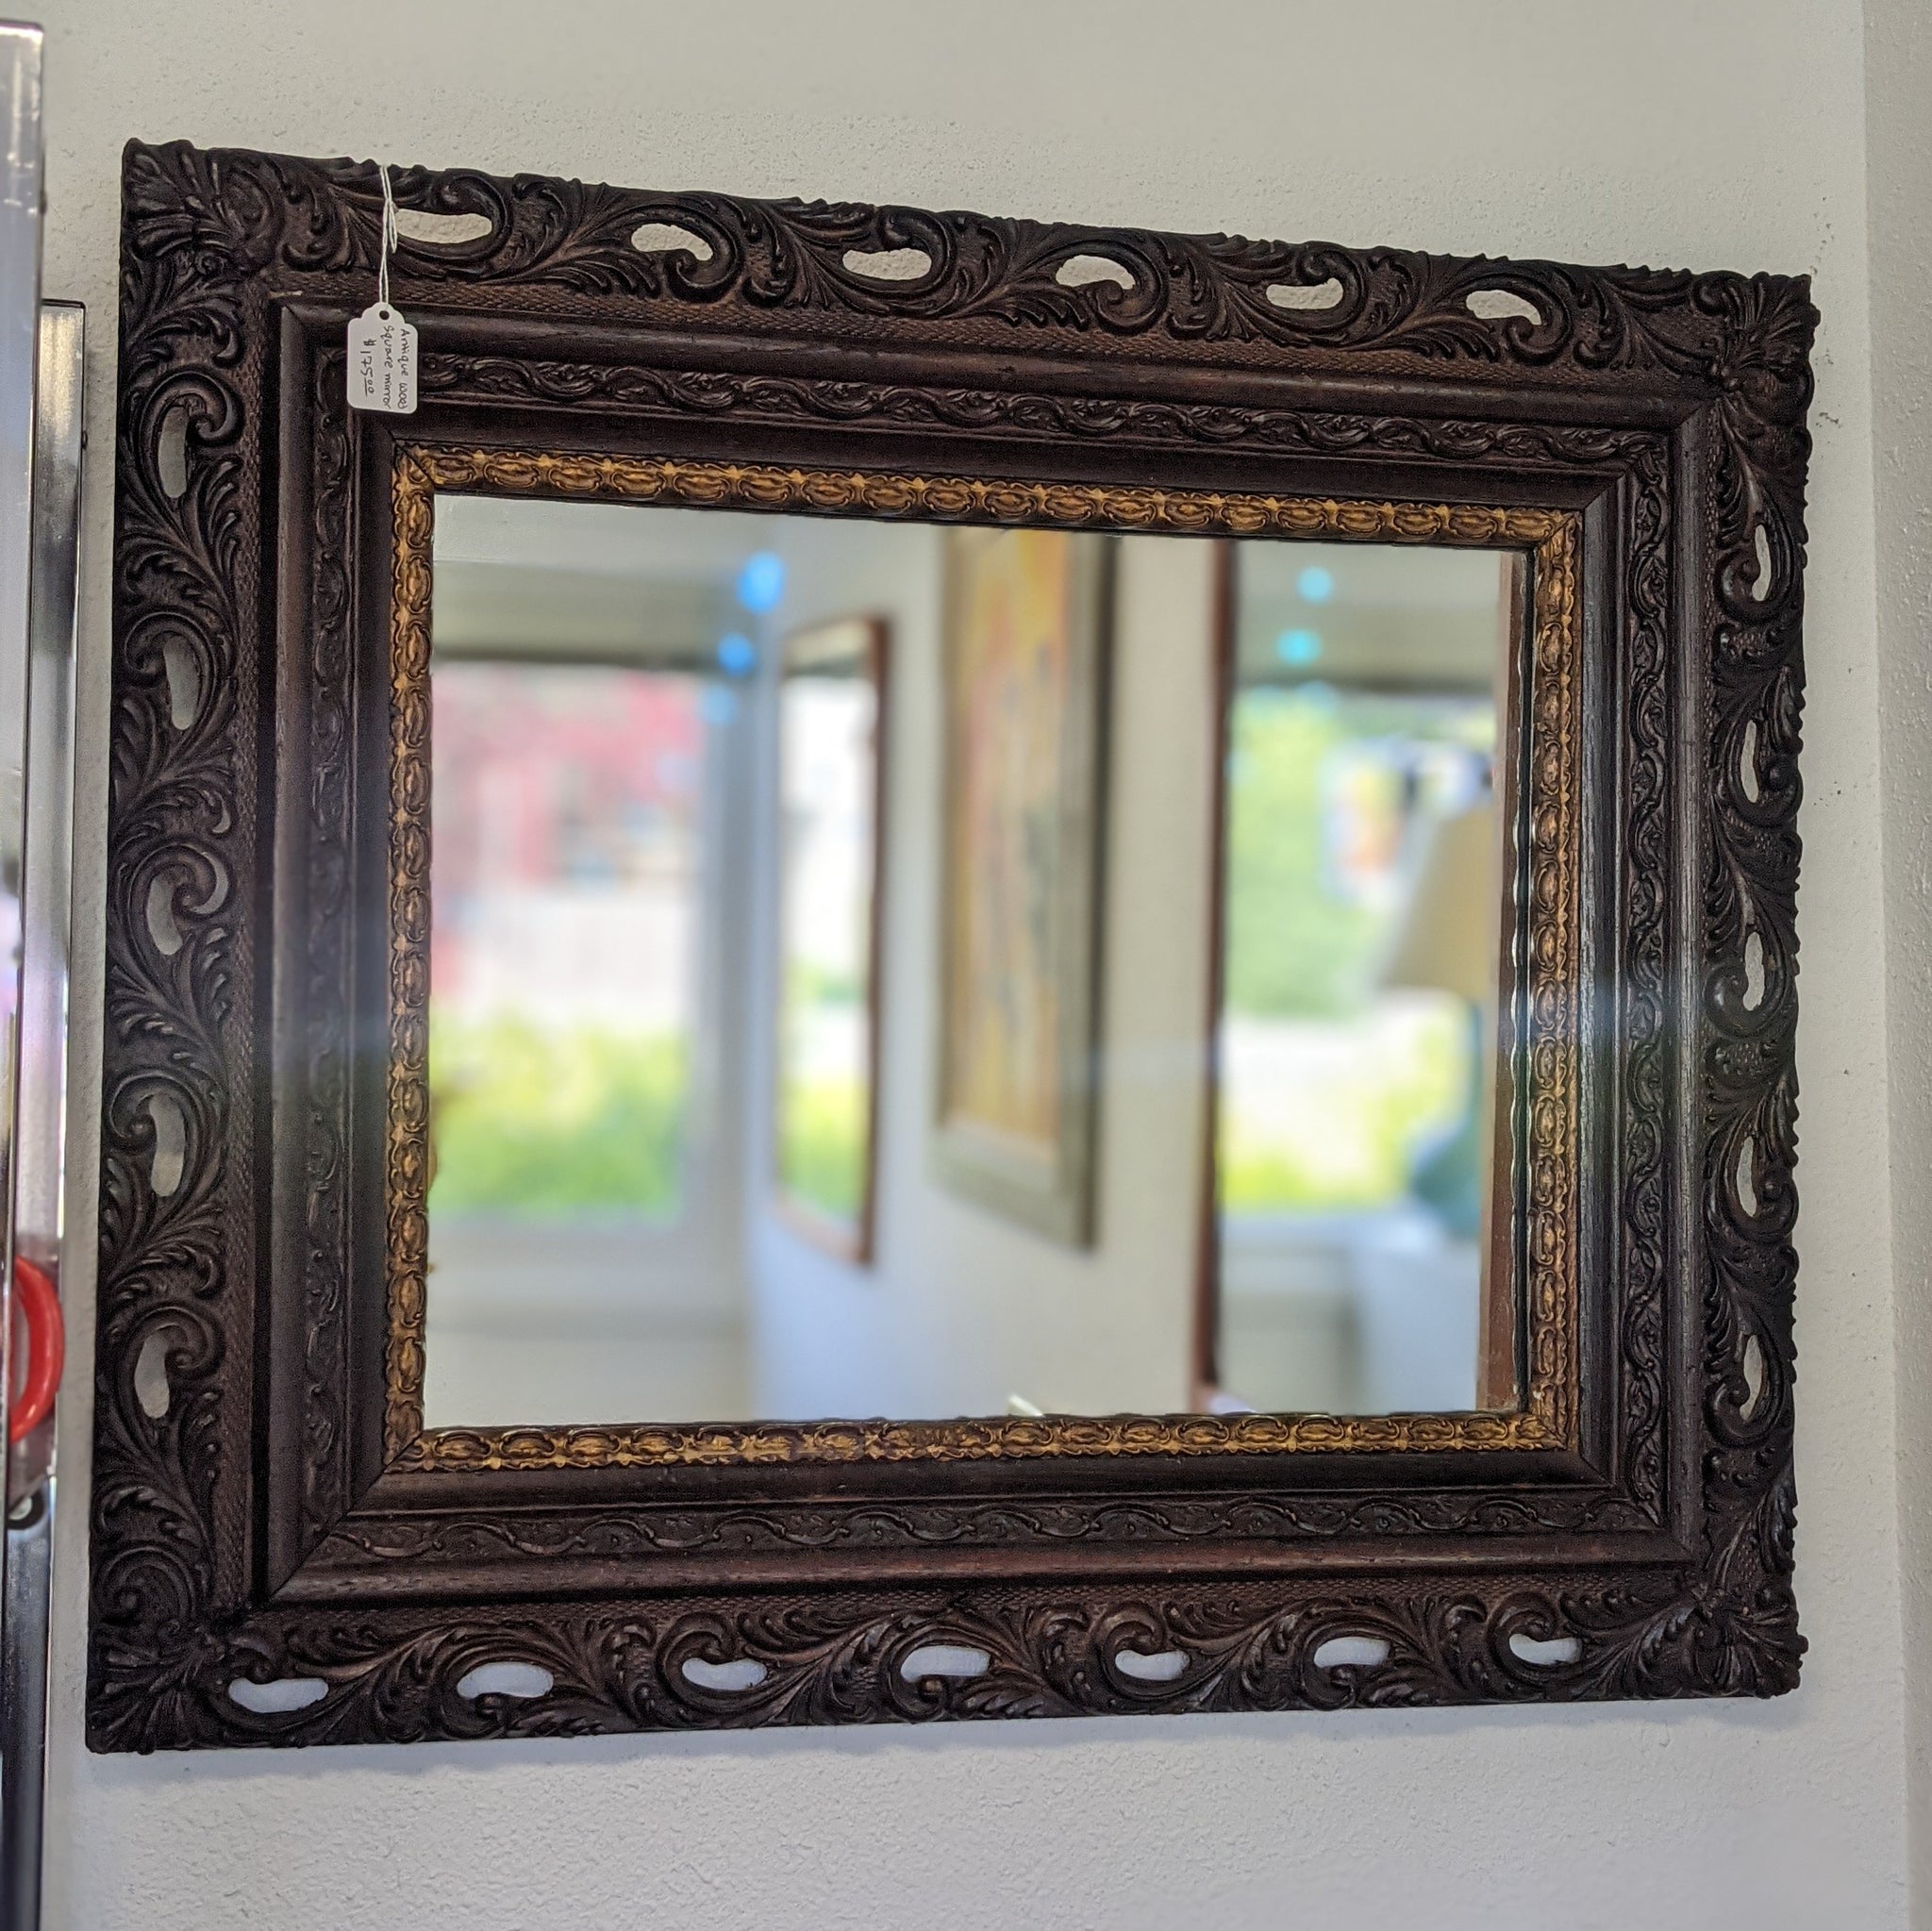 Mirror with dark wood and gold frame